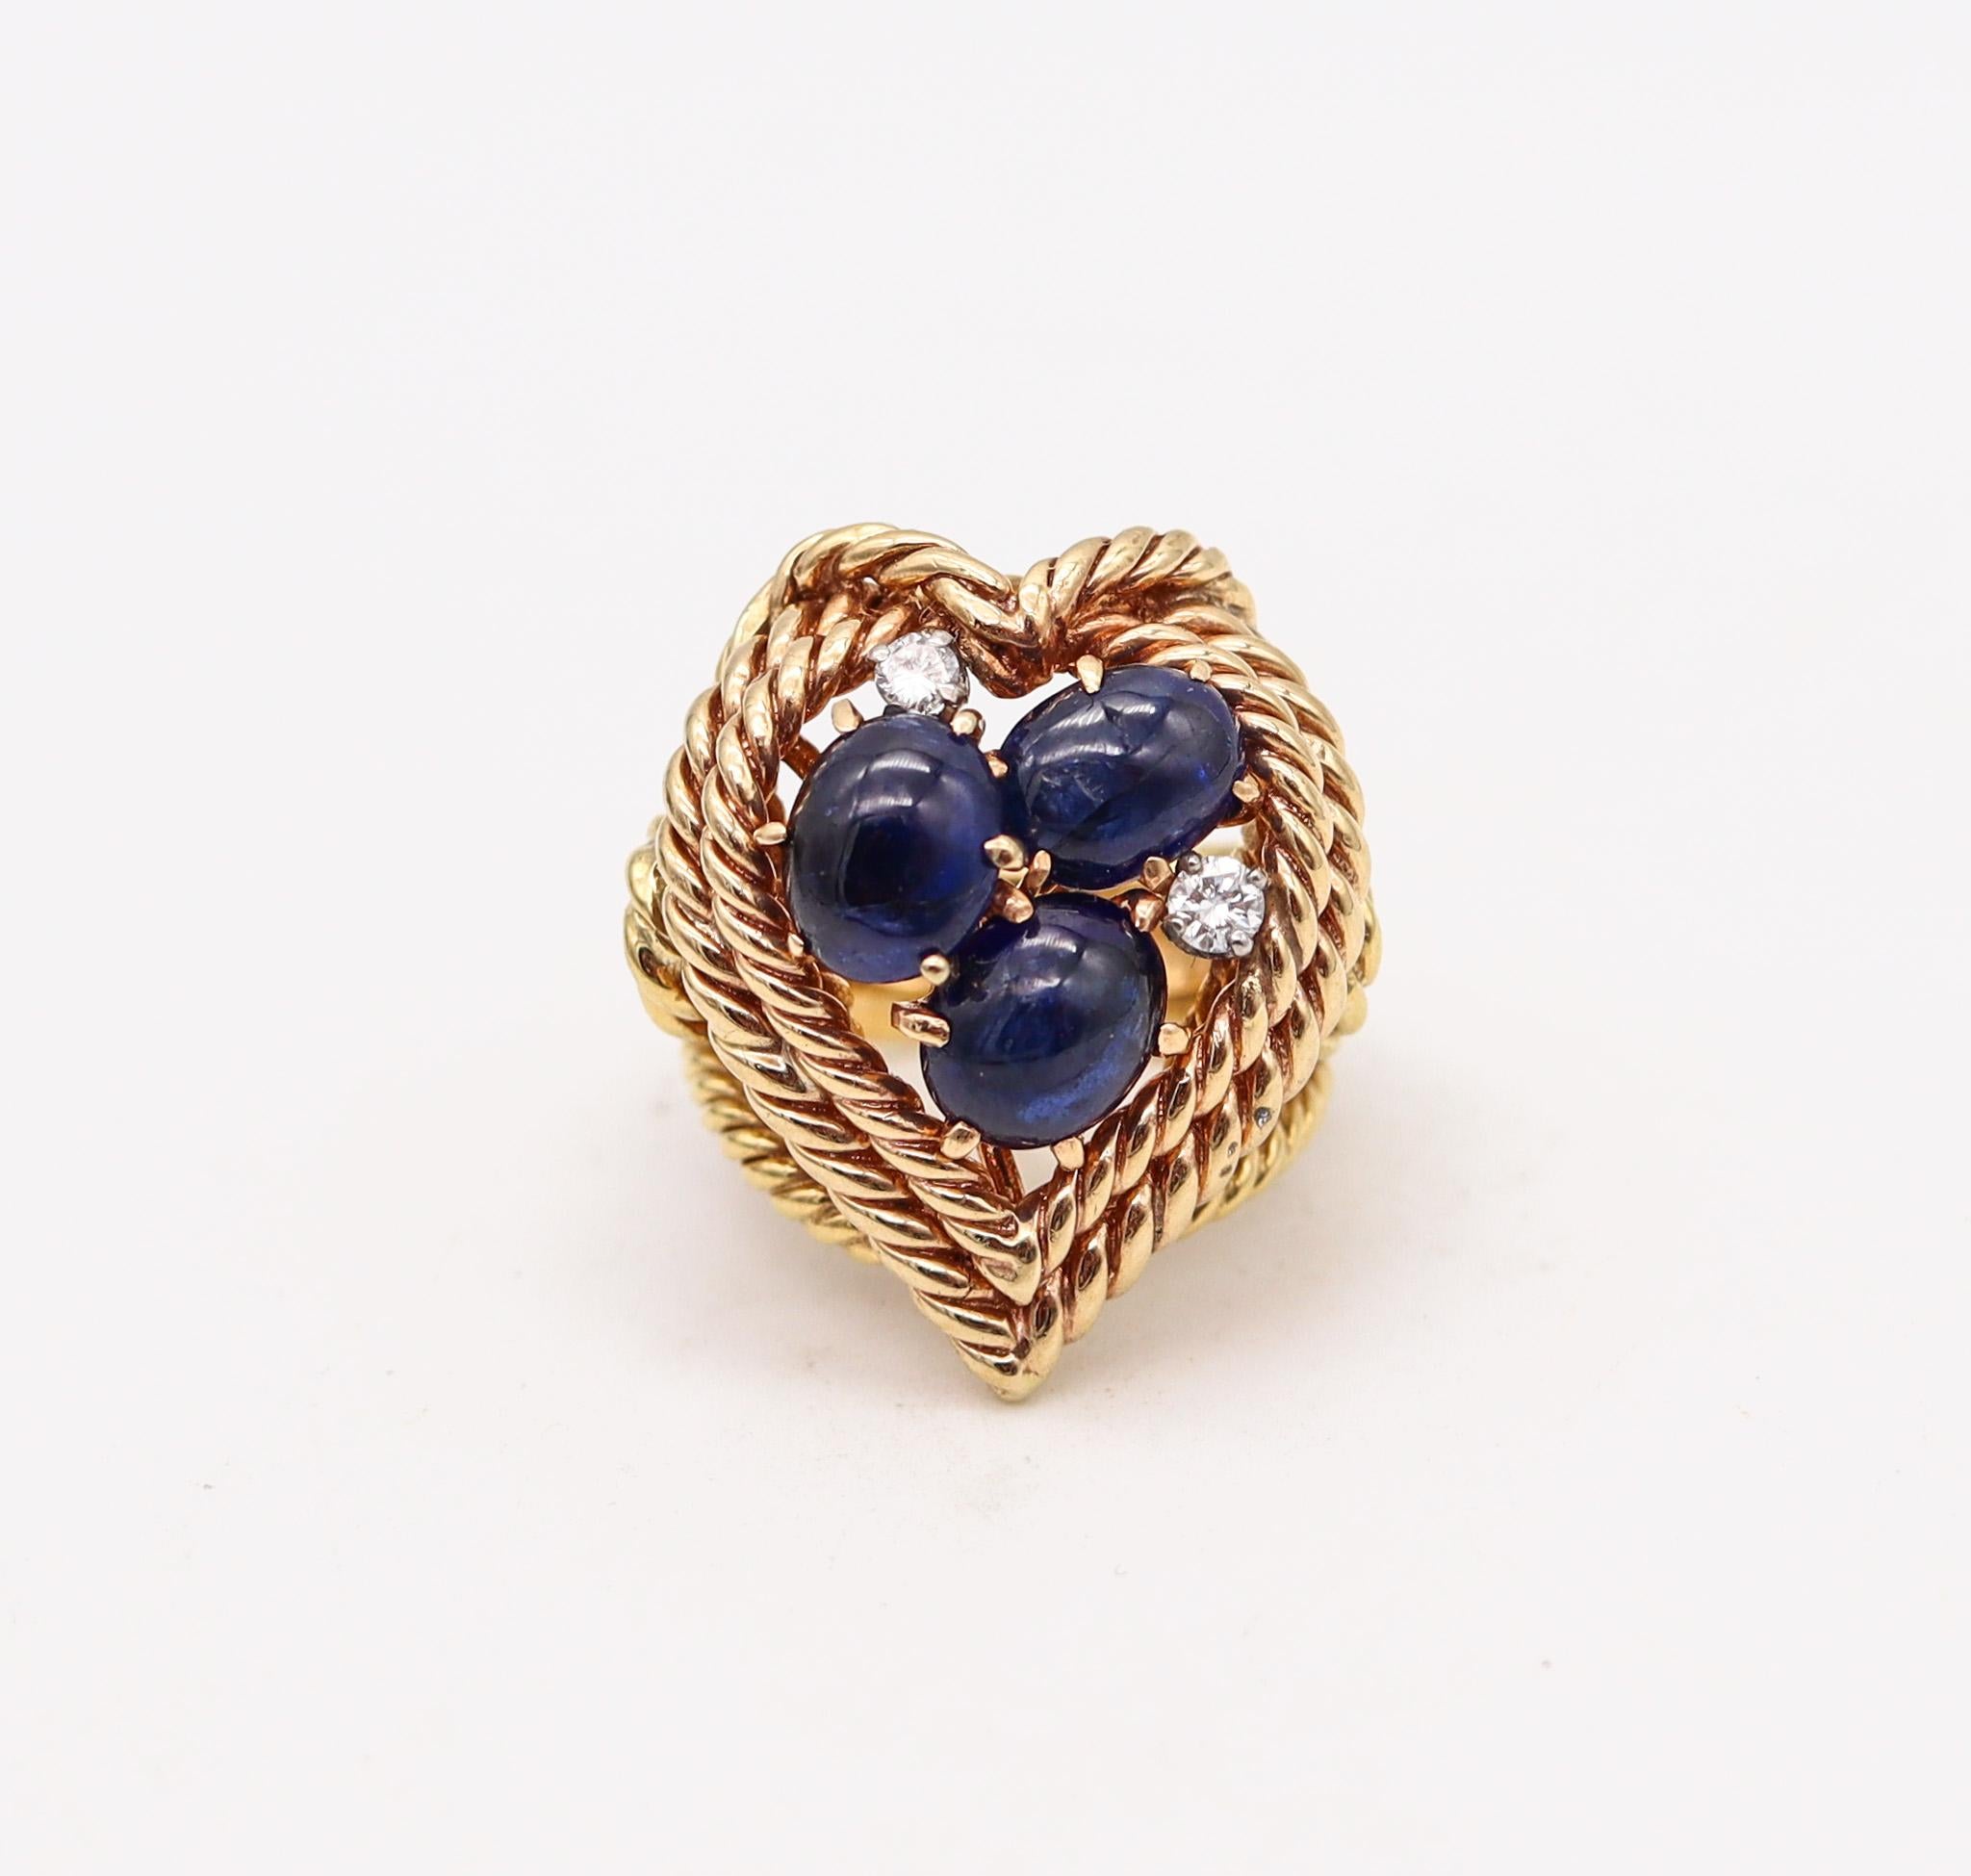 Retro cocktail ring from the mid century.

Beautiful cocktail ring, crafted in Italy during the mid century period, back in the 1960. It was crafted by multiples twisted wires attached together as a nest, which are made up in solid yellow gold of 18